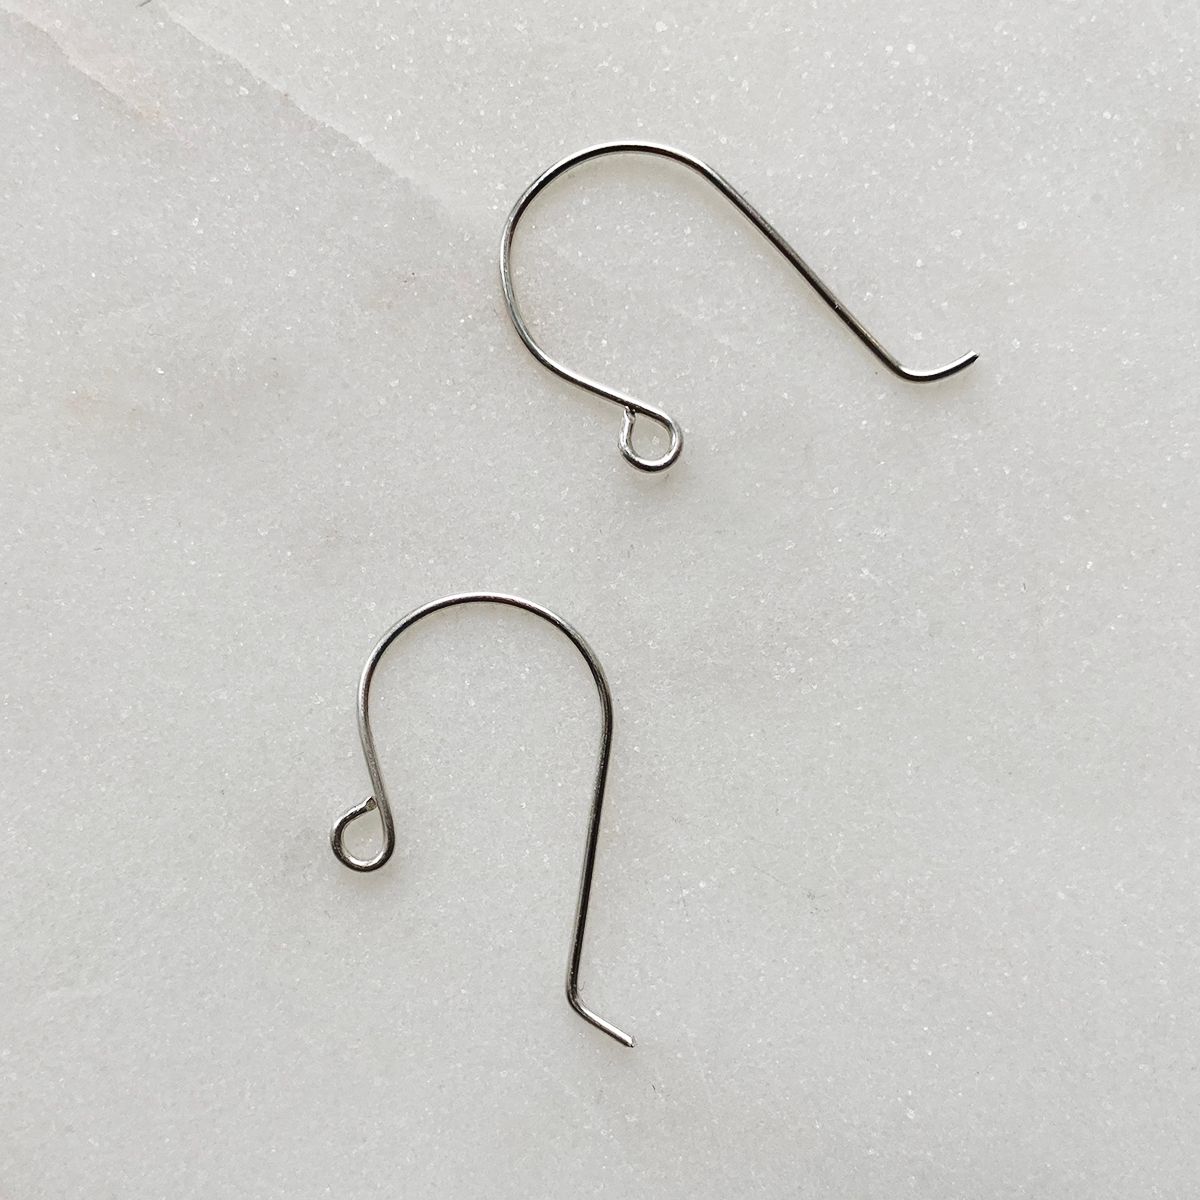 How to make EARRING HOOK at home without any tool